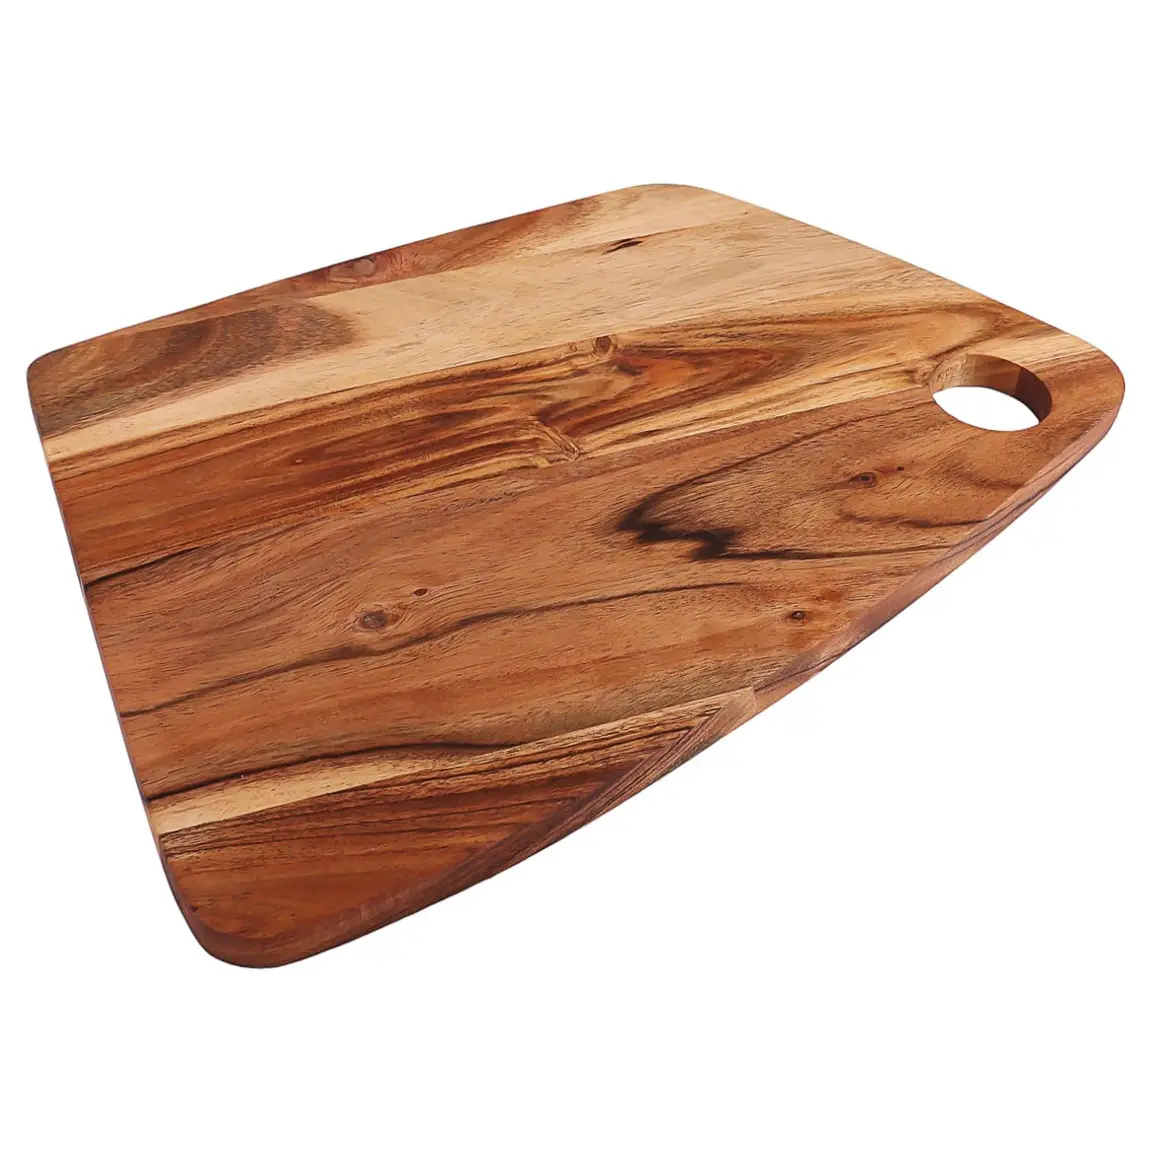 Food Grade Acacia Wood Cutting / Chopping Board Customized Wooden Serving Platter for Hotels, Restaurant & Home at Cheap Price